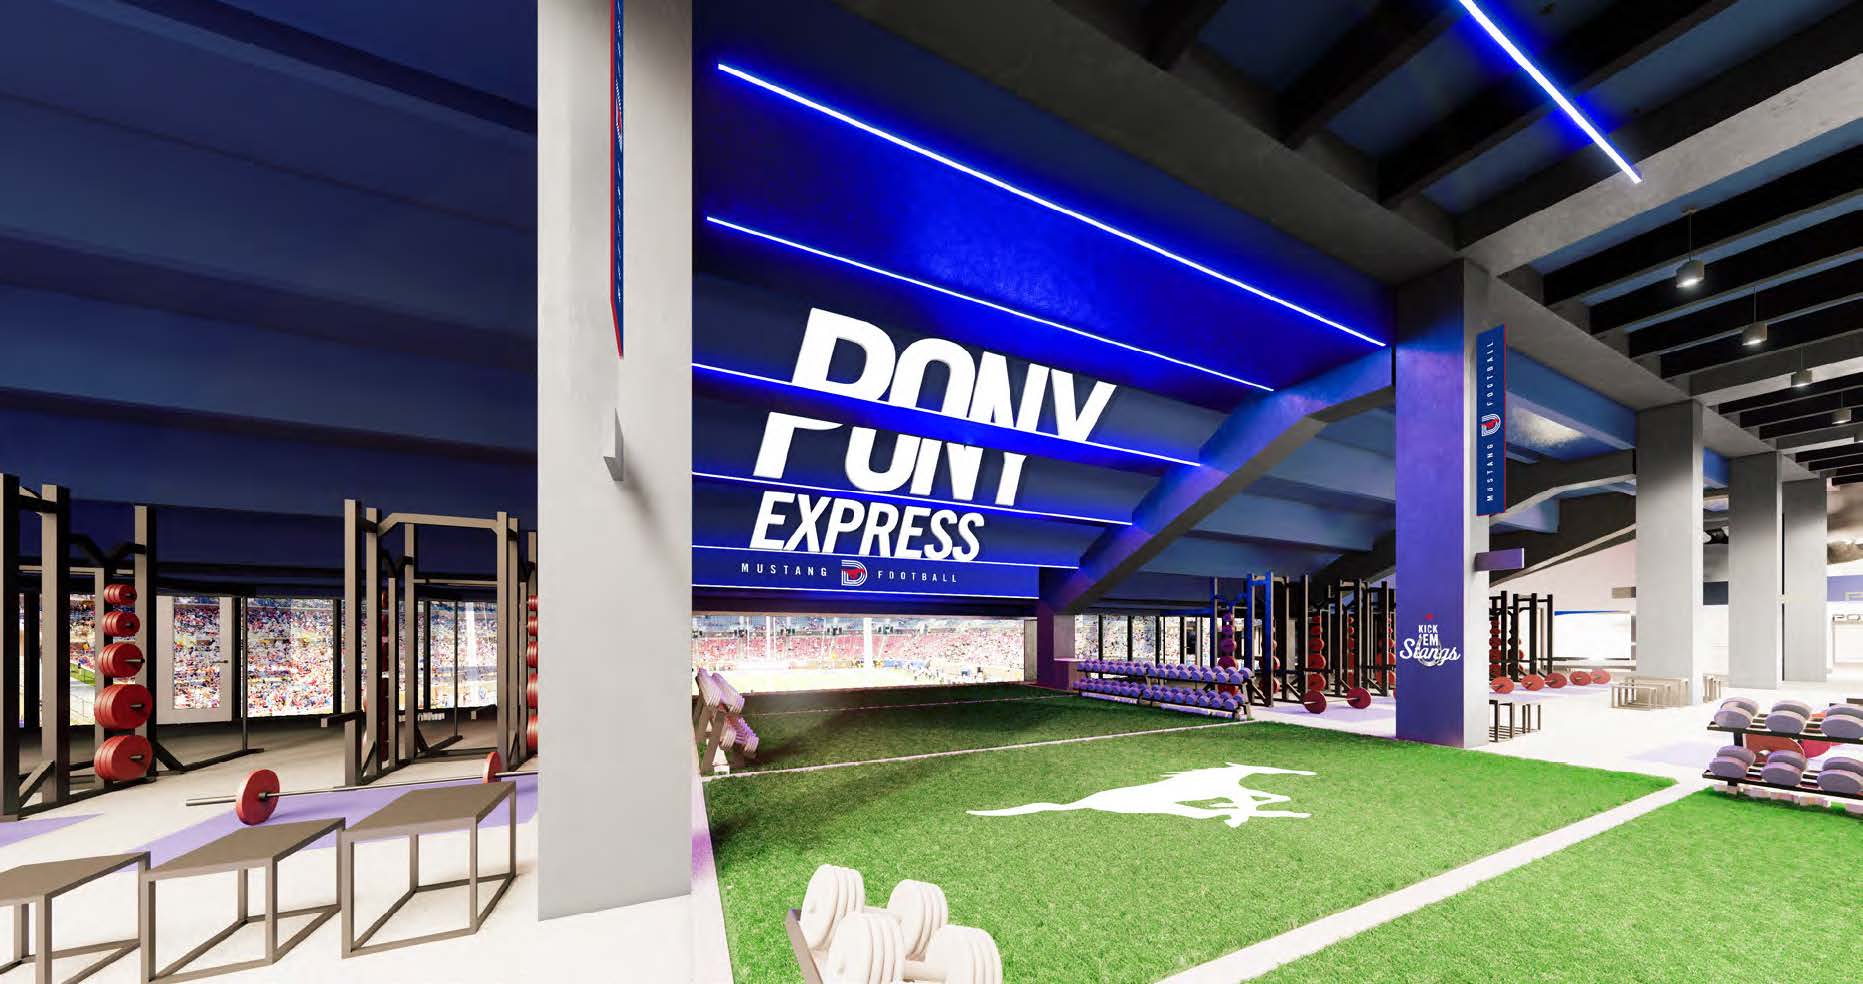 Conceptual rendering of the sports performance suite